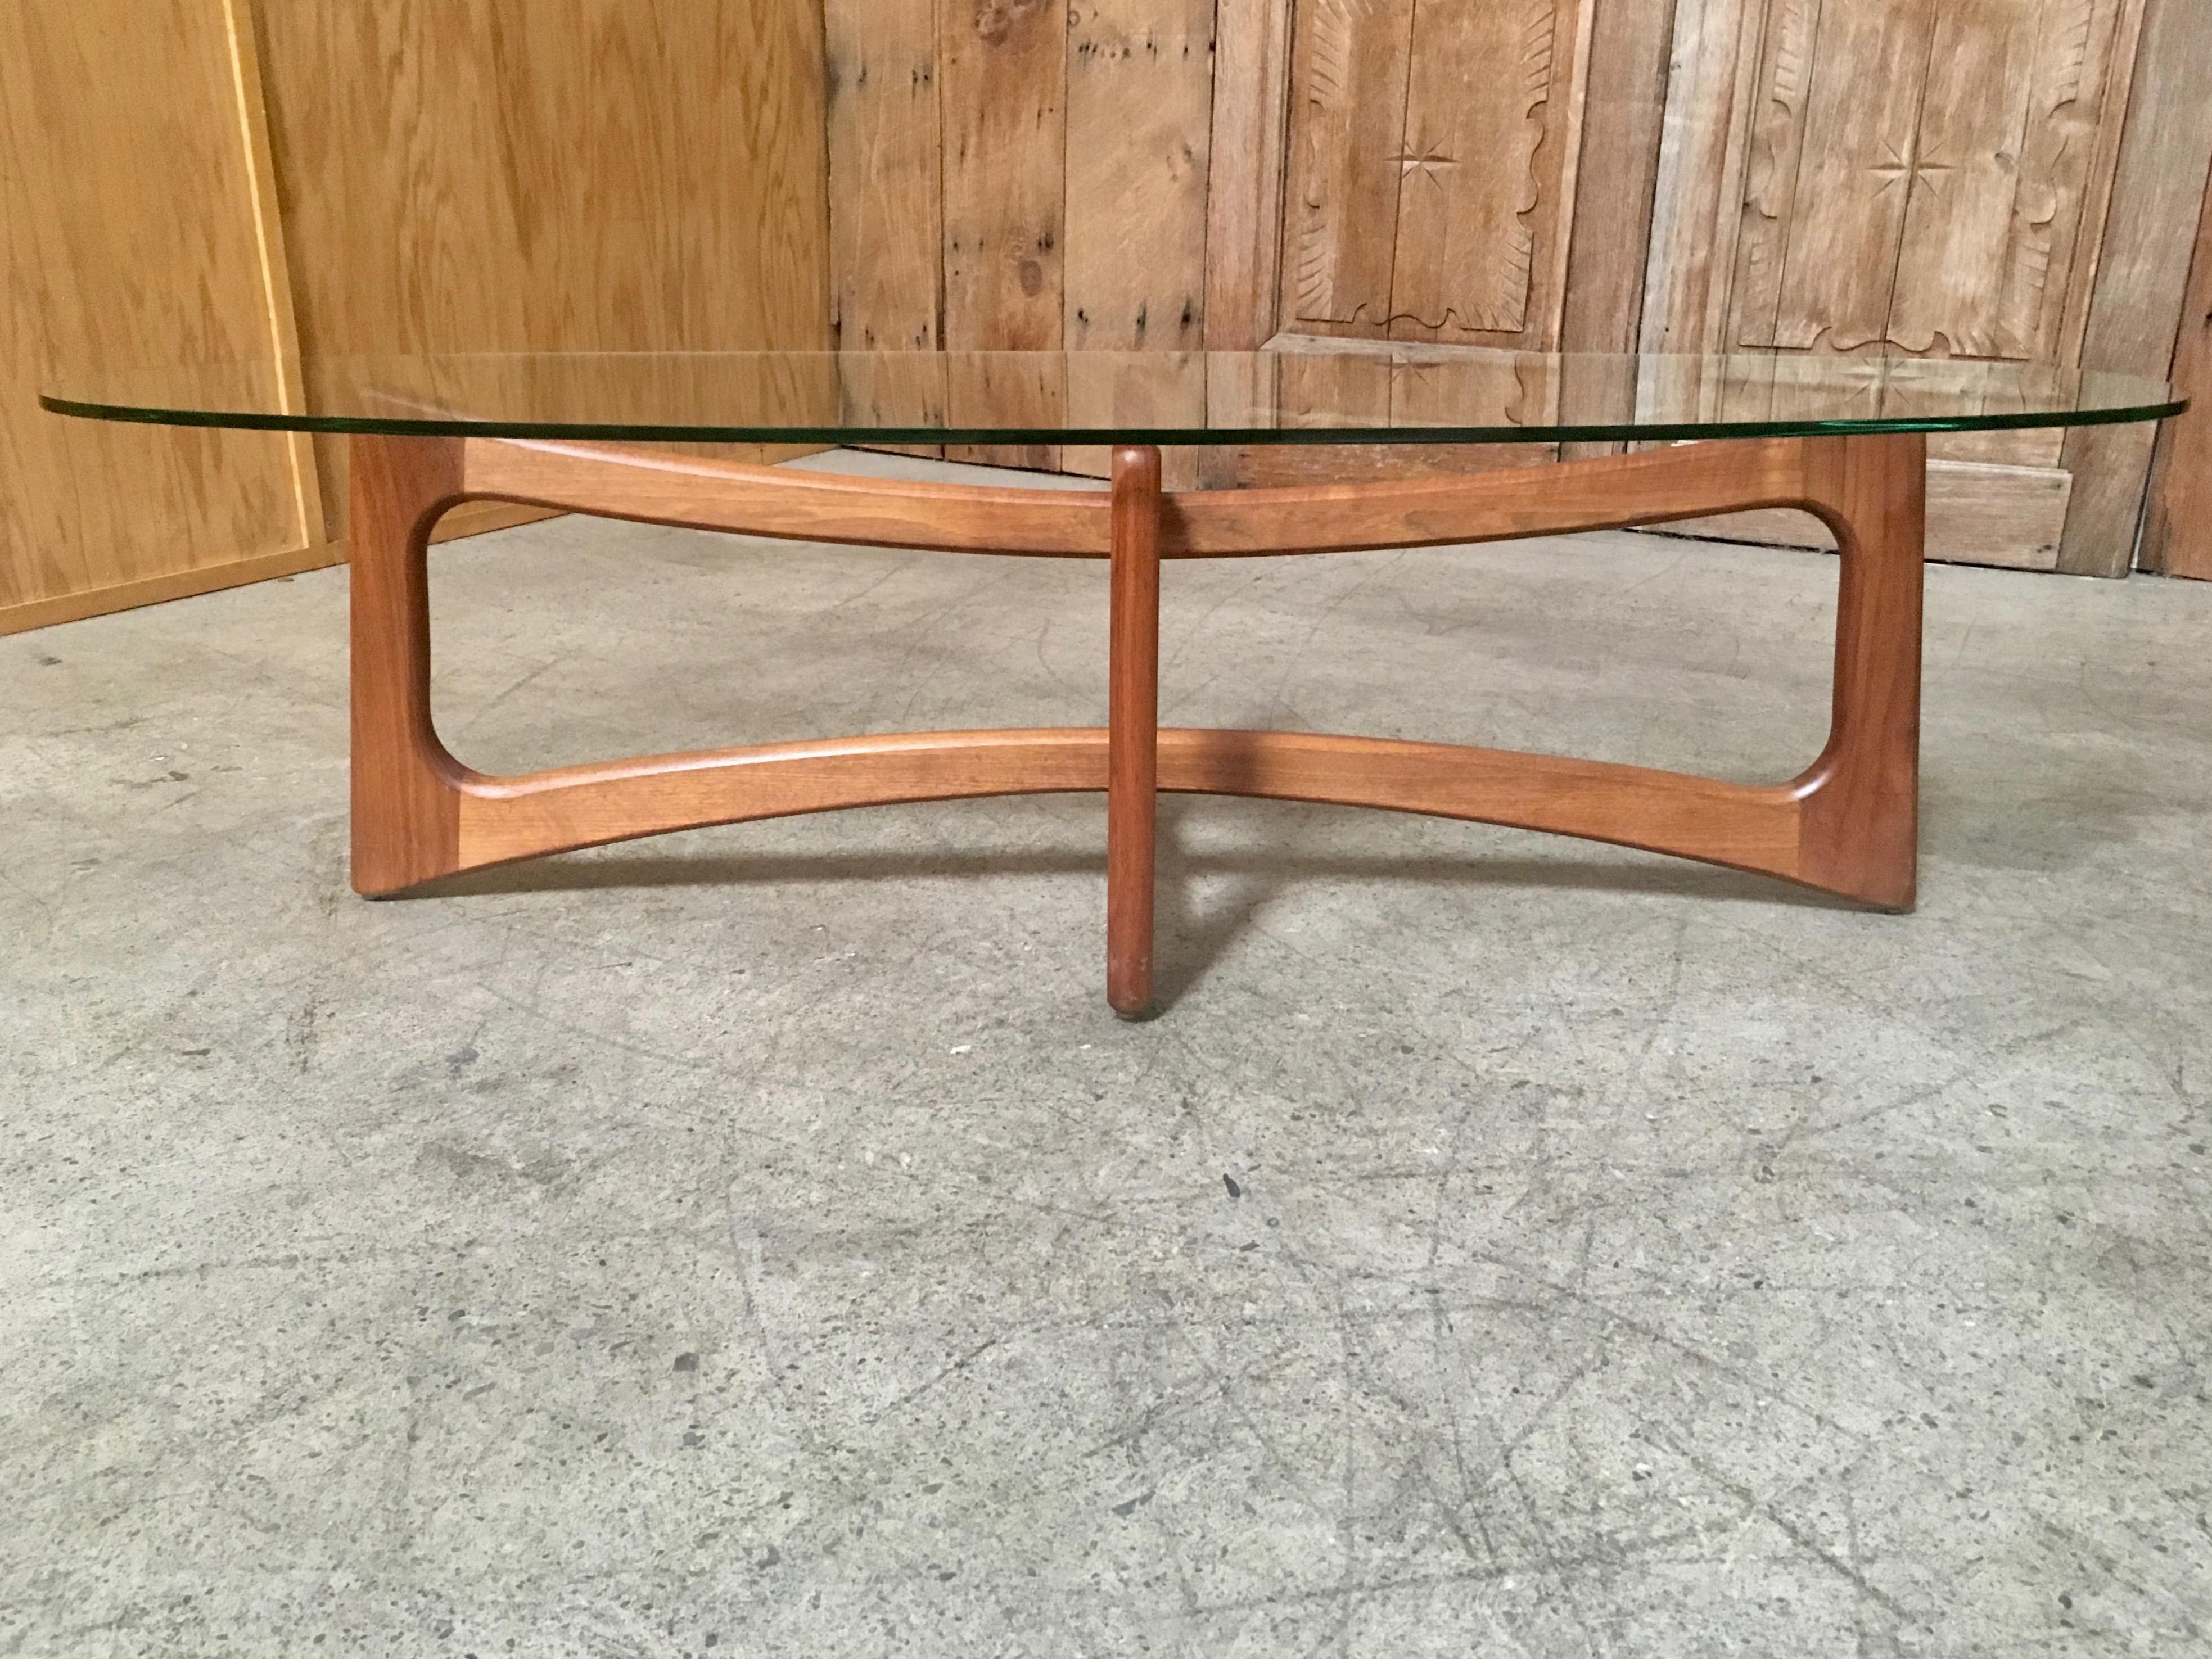 Solid sculpted walnut coffee table base with oval glass top design by Adrian Pearsall for Craft Associates.